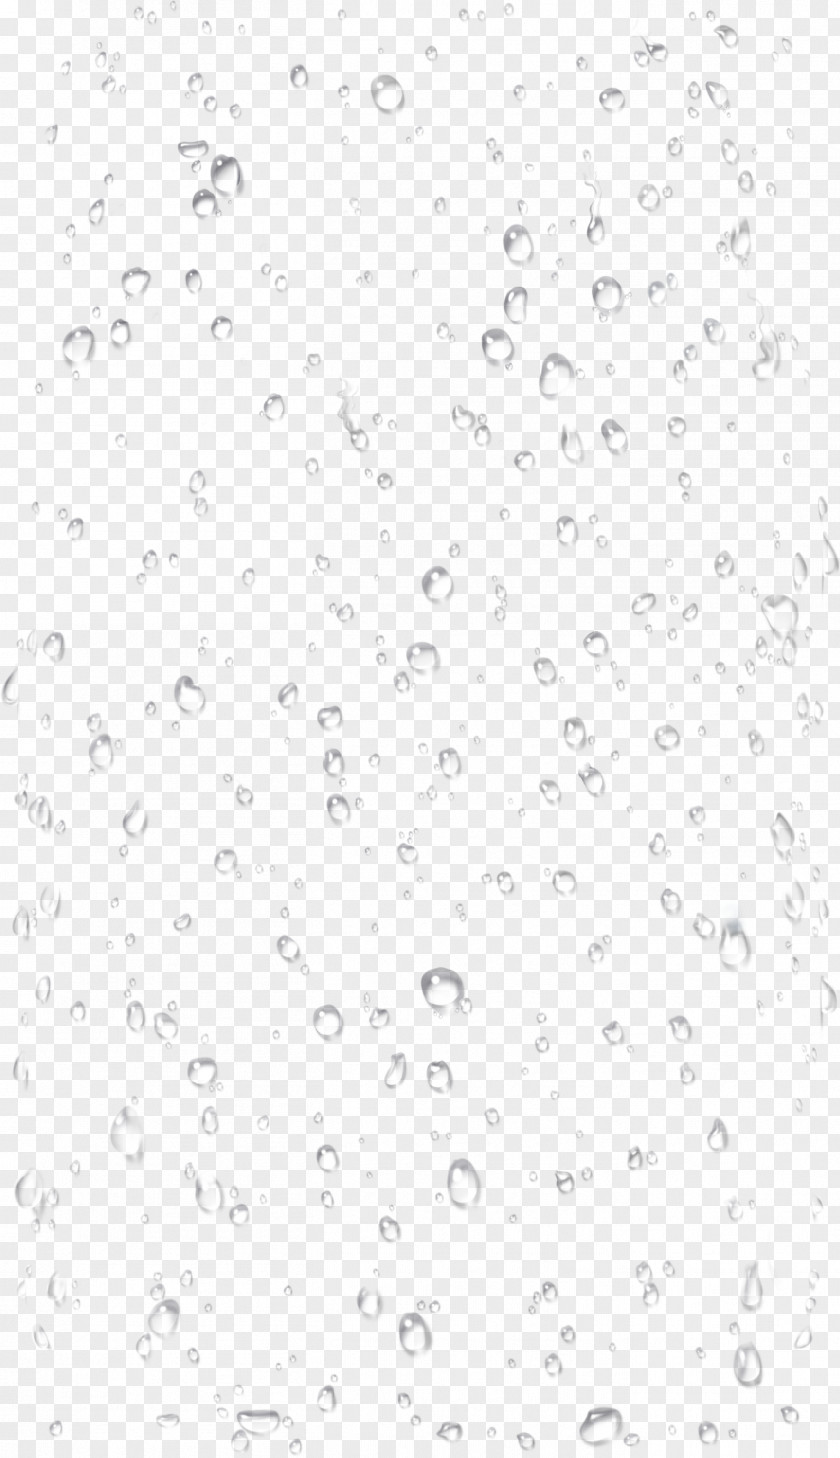 Water Drops Image Drop Scattering PNG